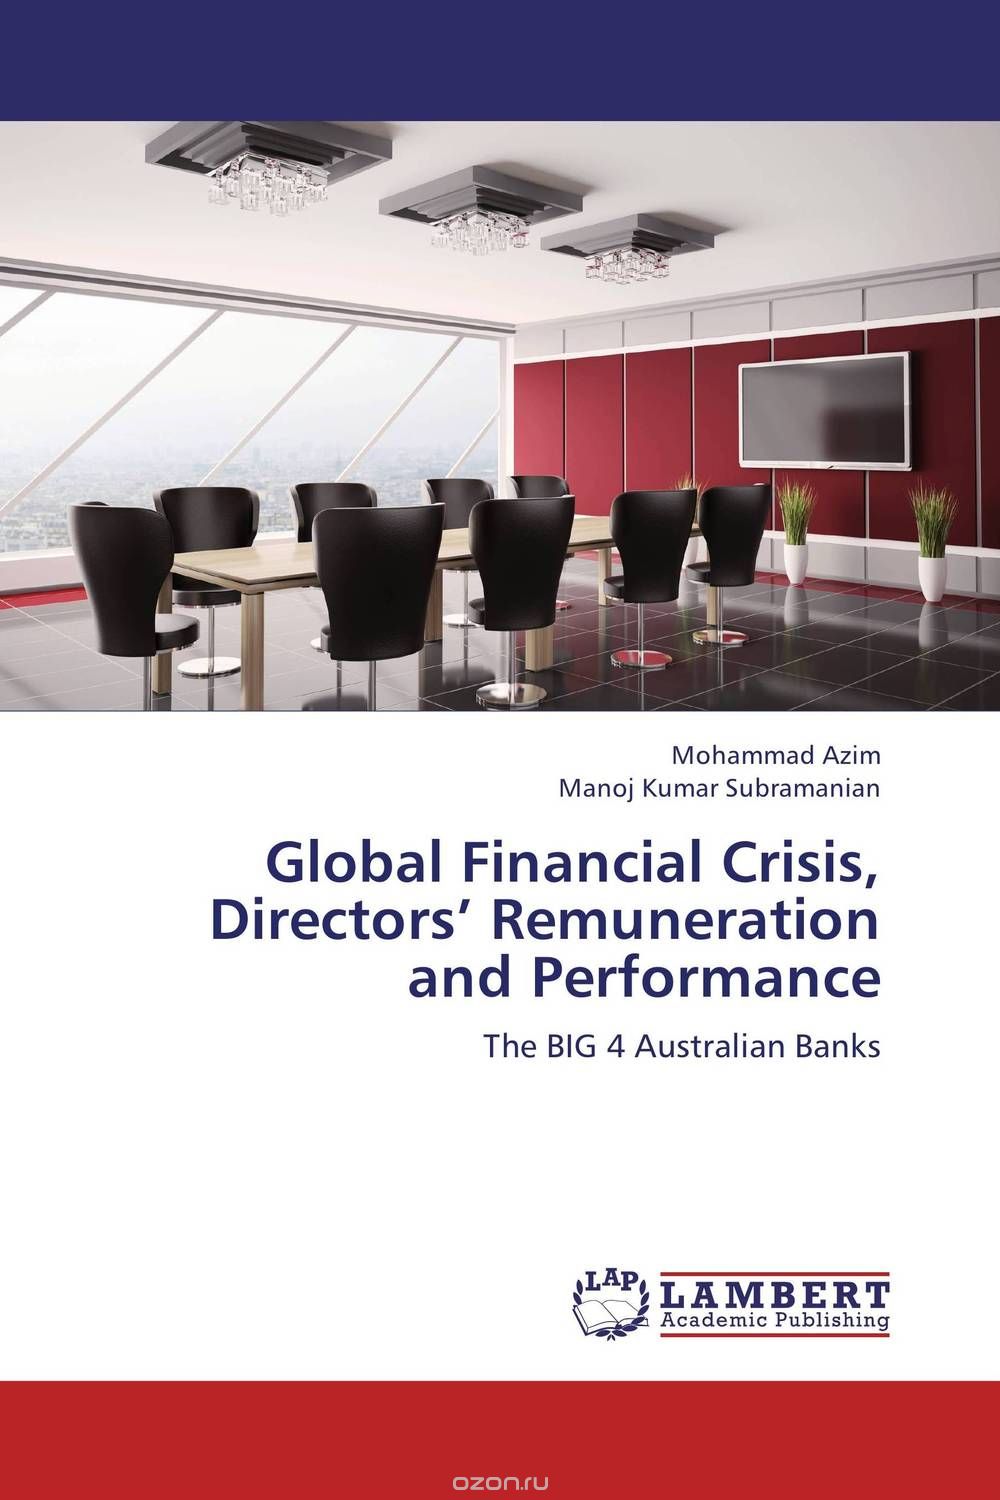 Global Financial Crisis, Directors’ Remuneration and Performance